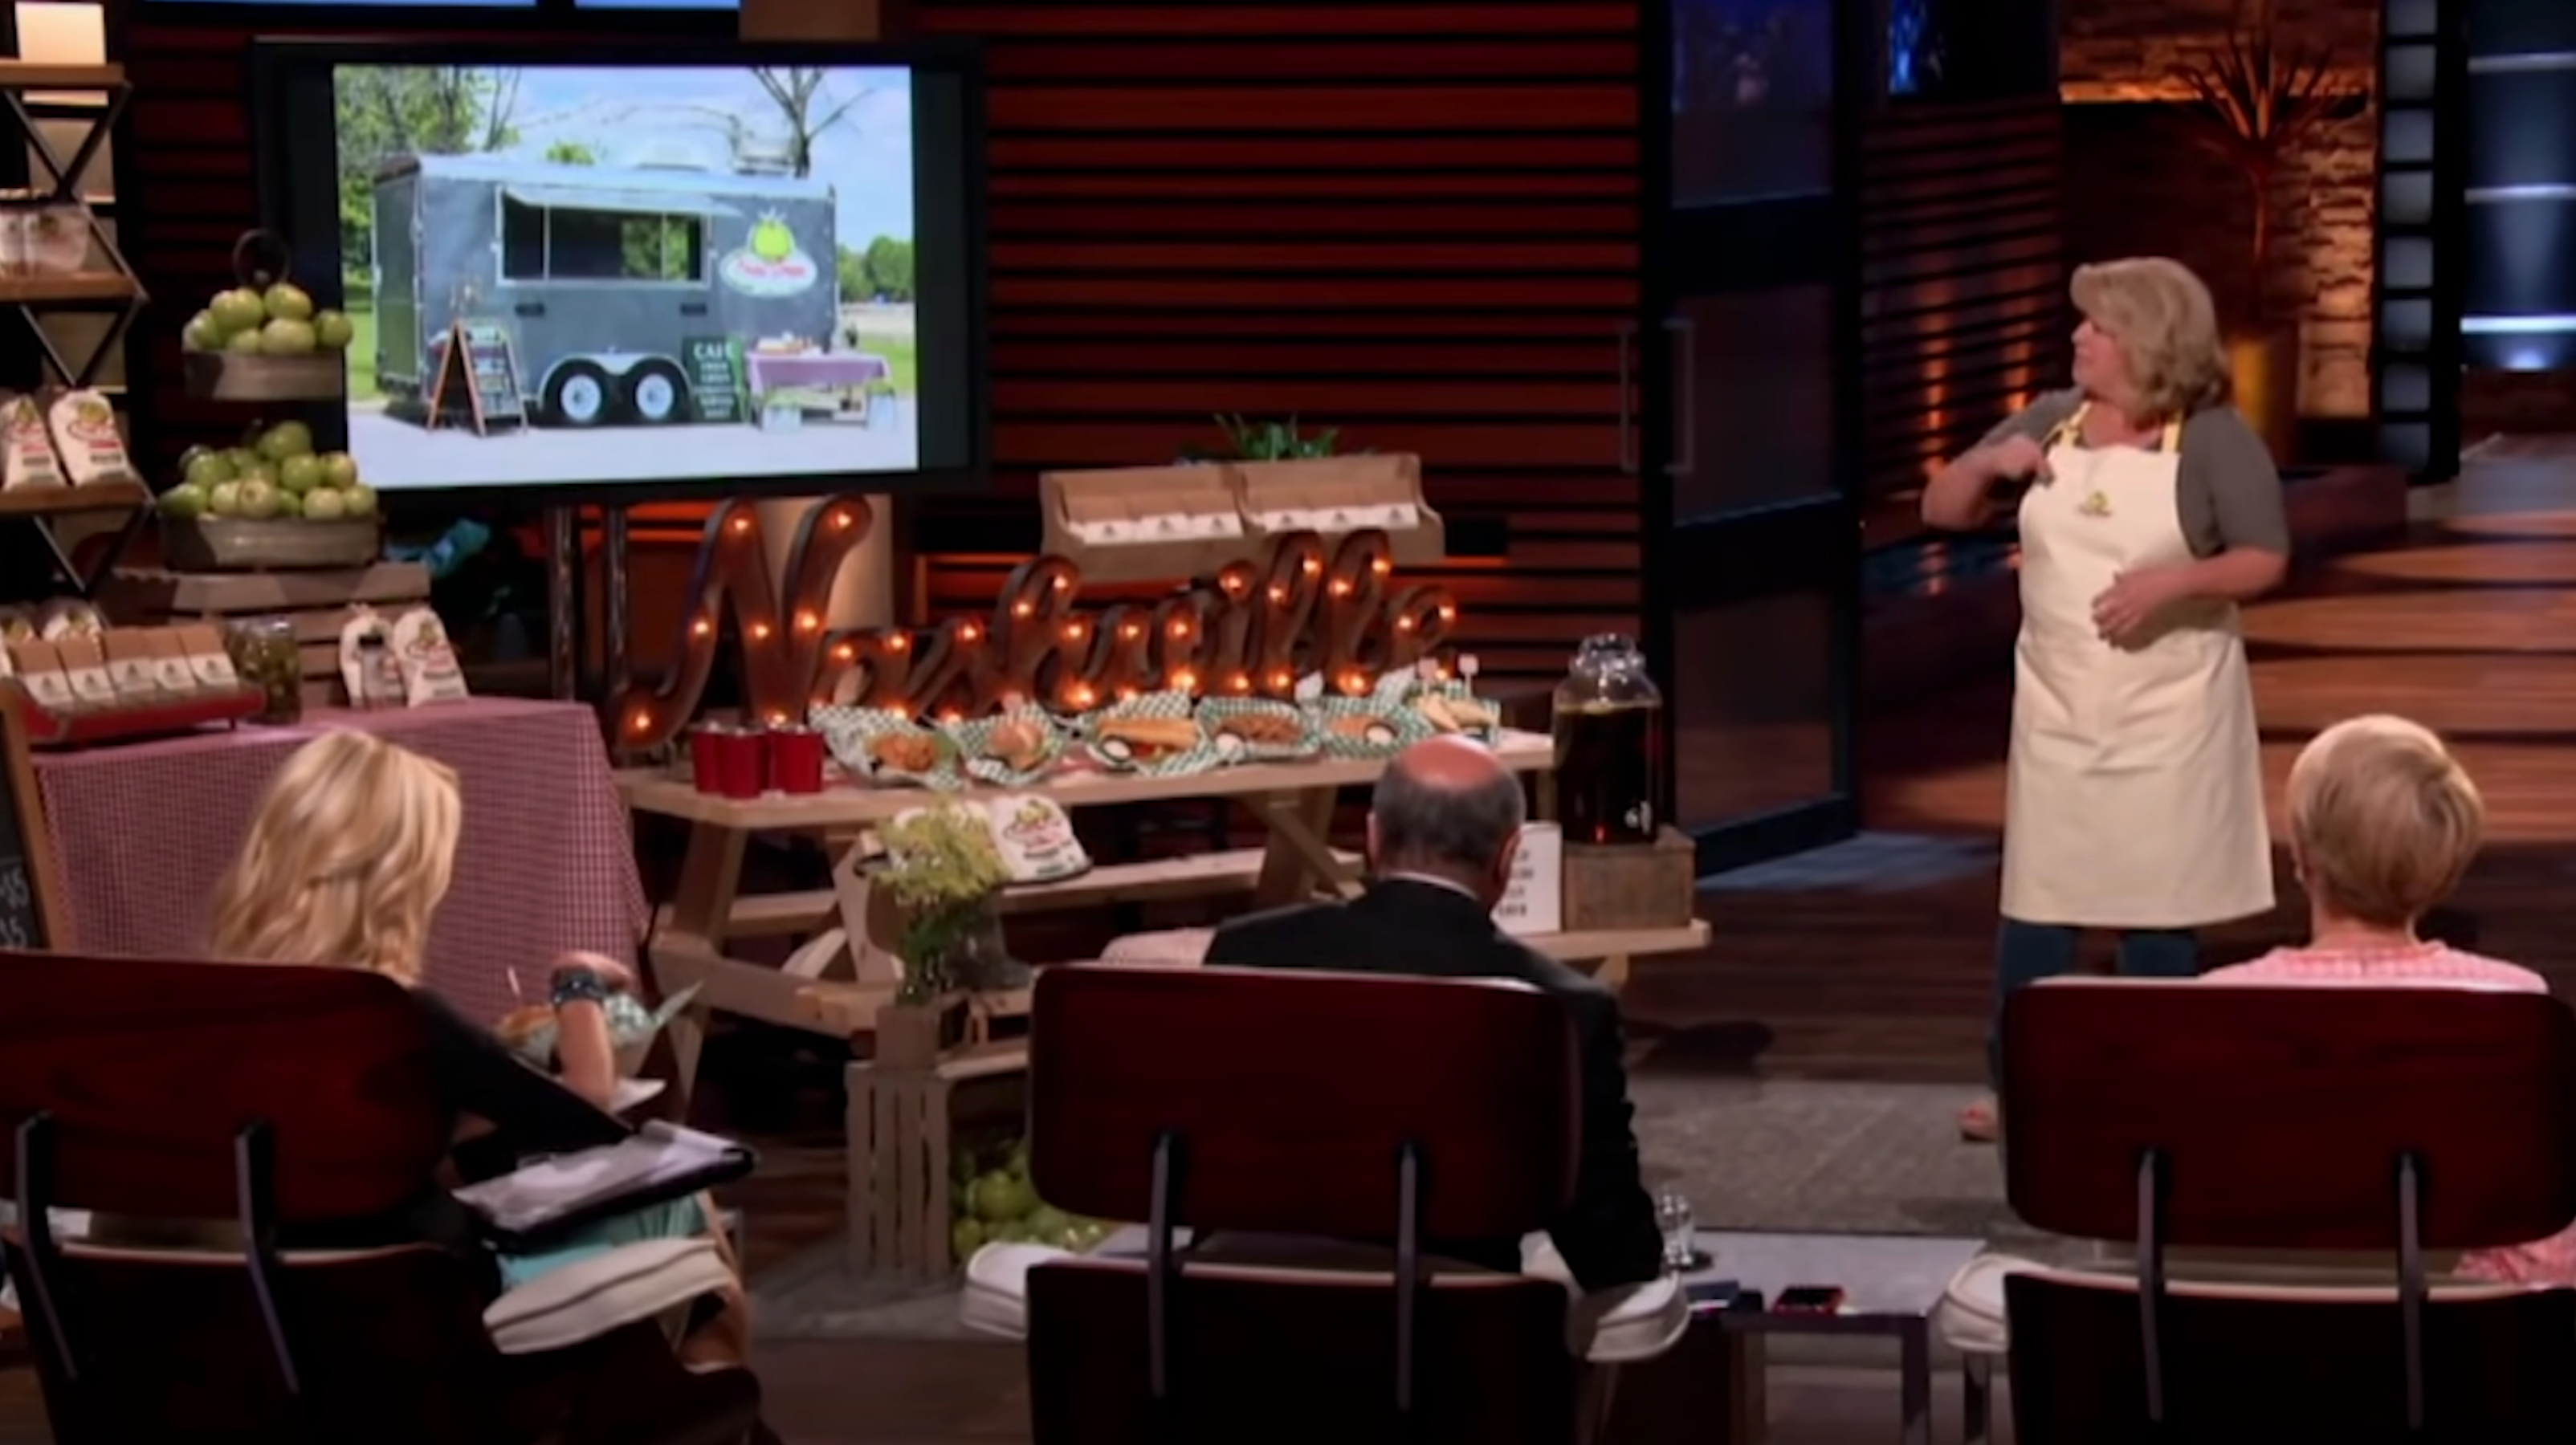 Load video: Video of the Shark Tank episode featuring Fried Green Tomatoes